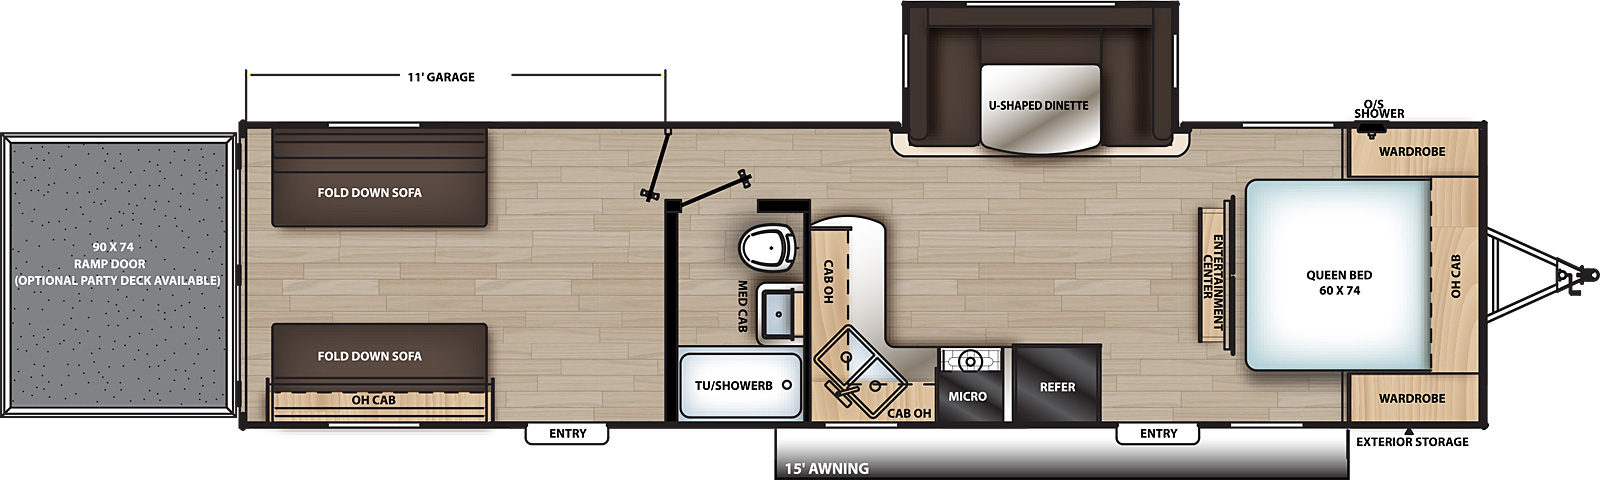 The 29THS has one slide out on the off-door side and two entry doors on the door side. Interior layout from front to back: foot facing queen bed with overhead cabinet and wardrobes on either side; entertainment center; off-door side slide out containing u-shaped dinette; door side kitchen containing refrigerator, cook top stove, microwave cabinet, double basin sink, and overhead cabinet; door side bathroom; and rear fold-down sofas with overhead cabinet on door side.